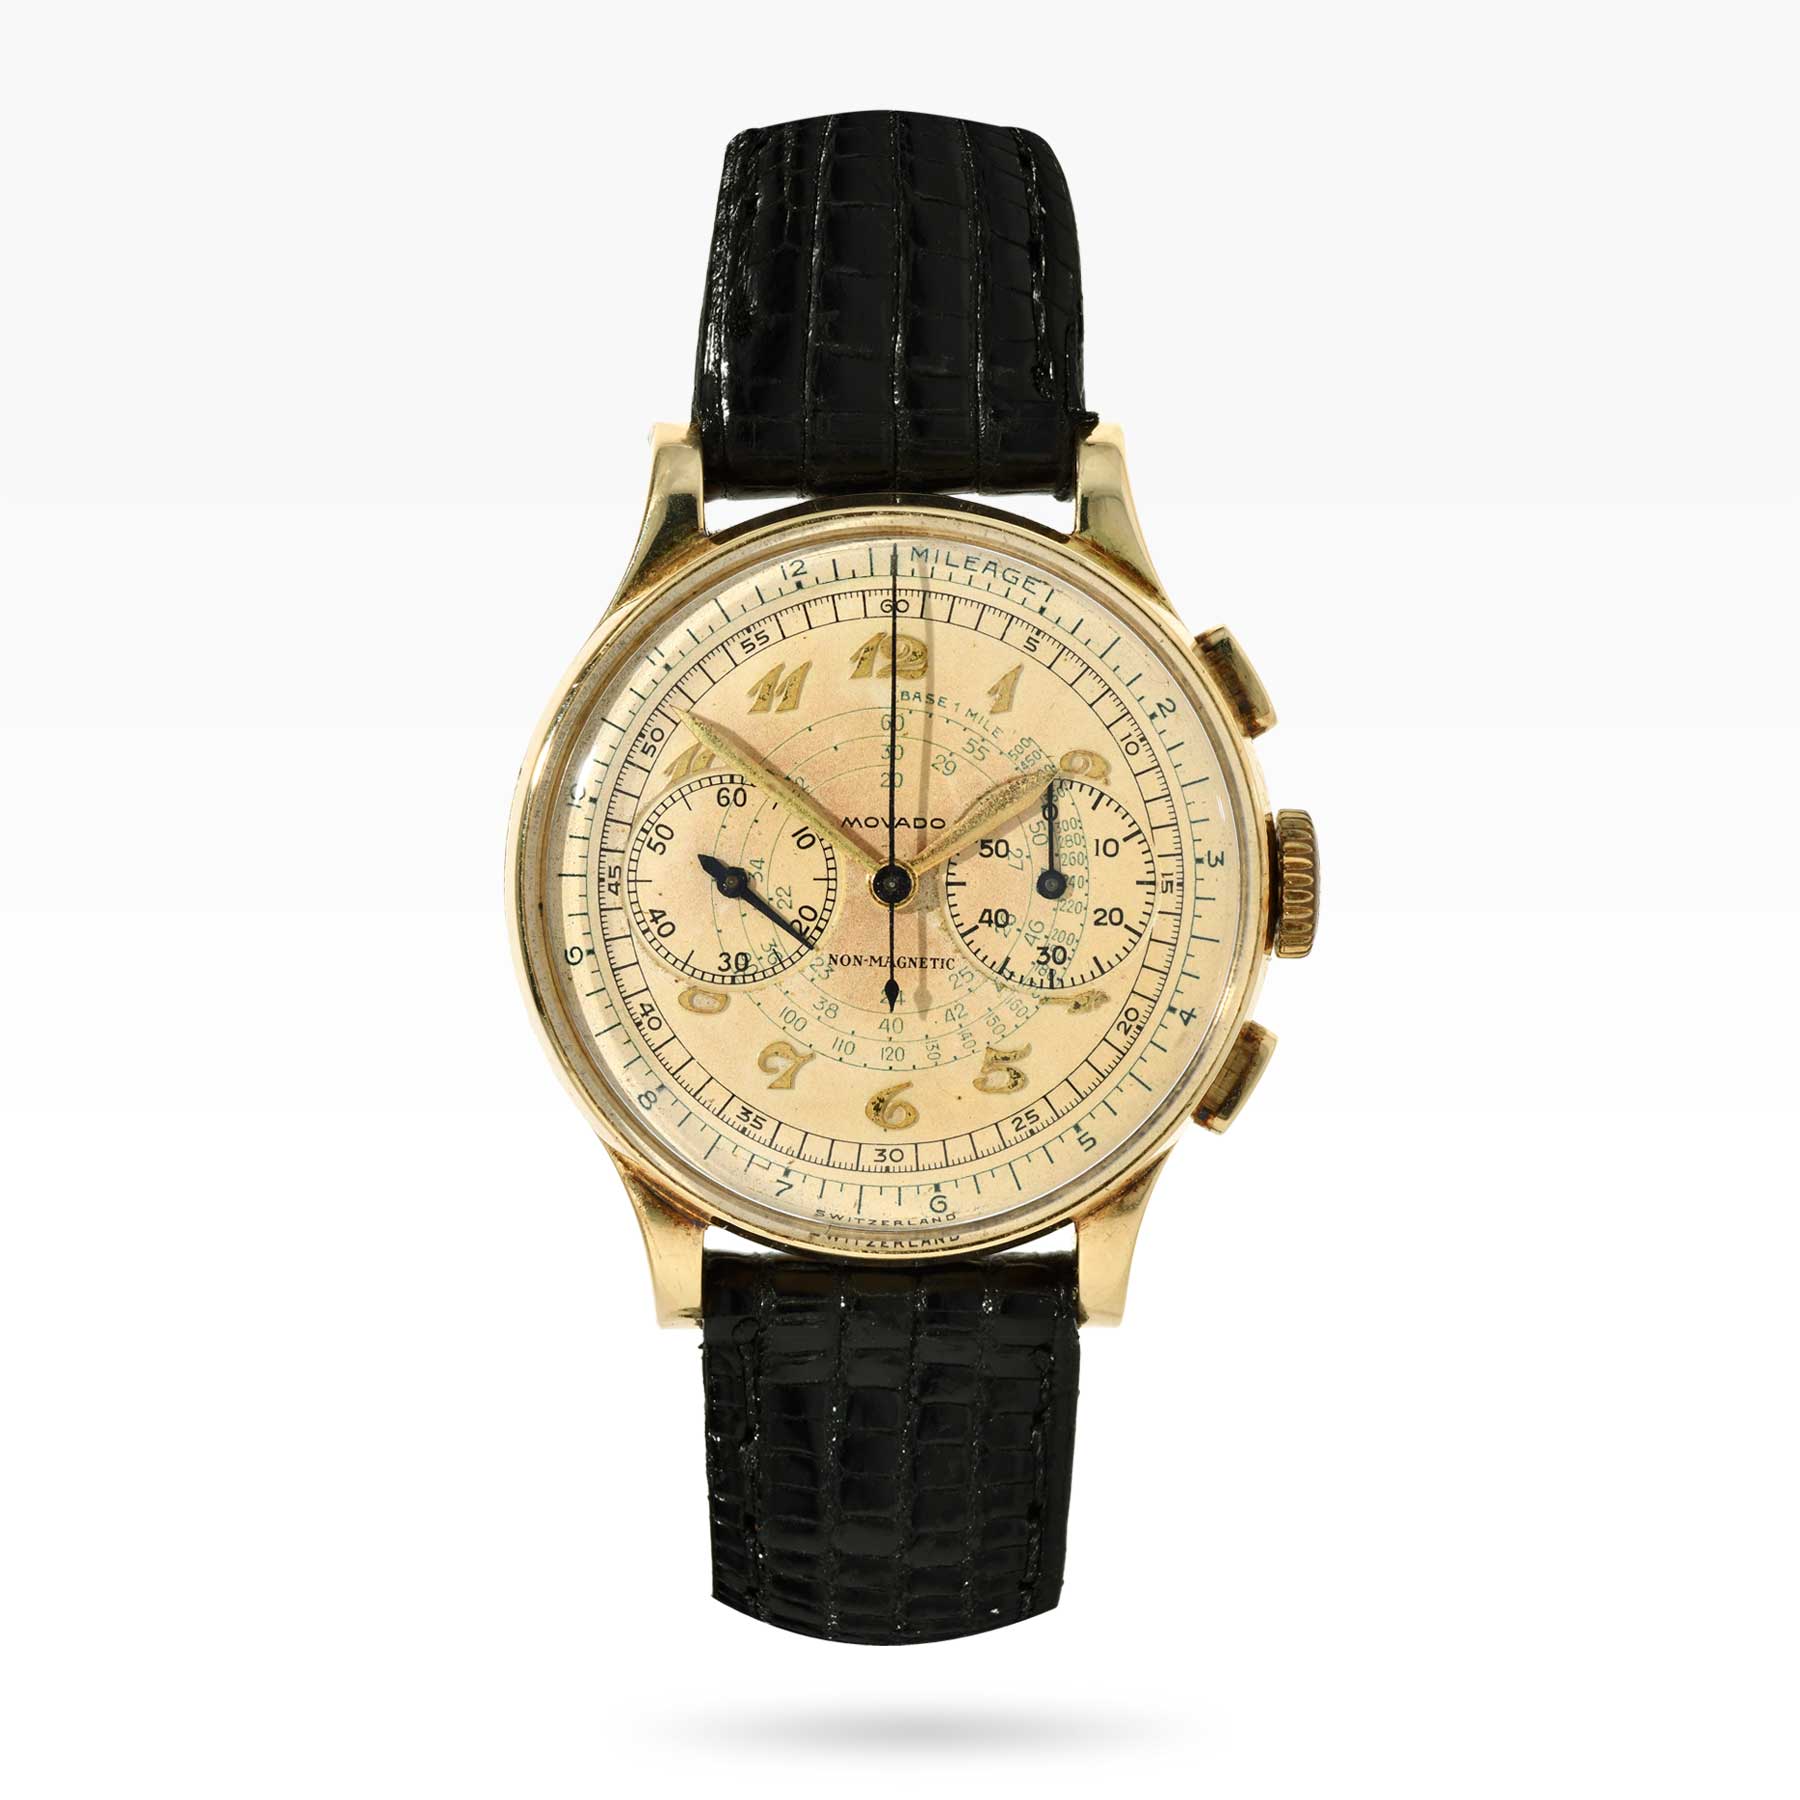 Movado Amagnetic 49002 Chronograph from the 1940s - 2ToneVintage Watches Singapore